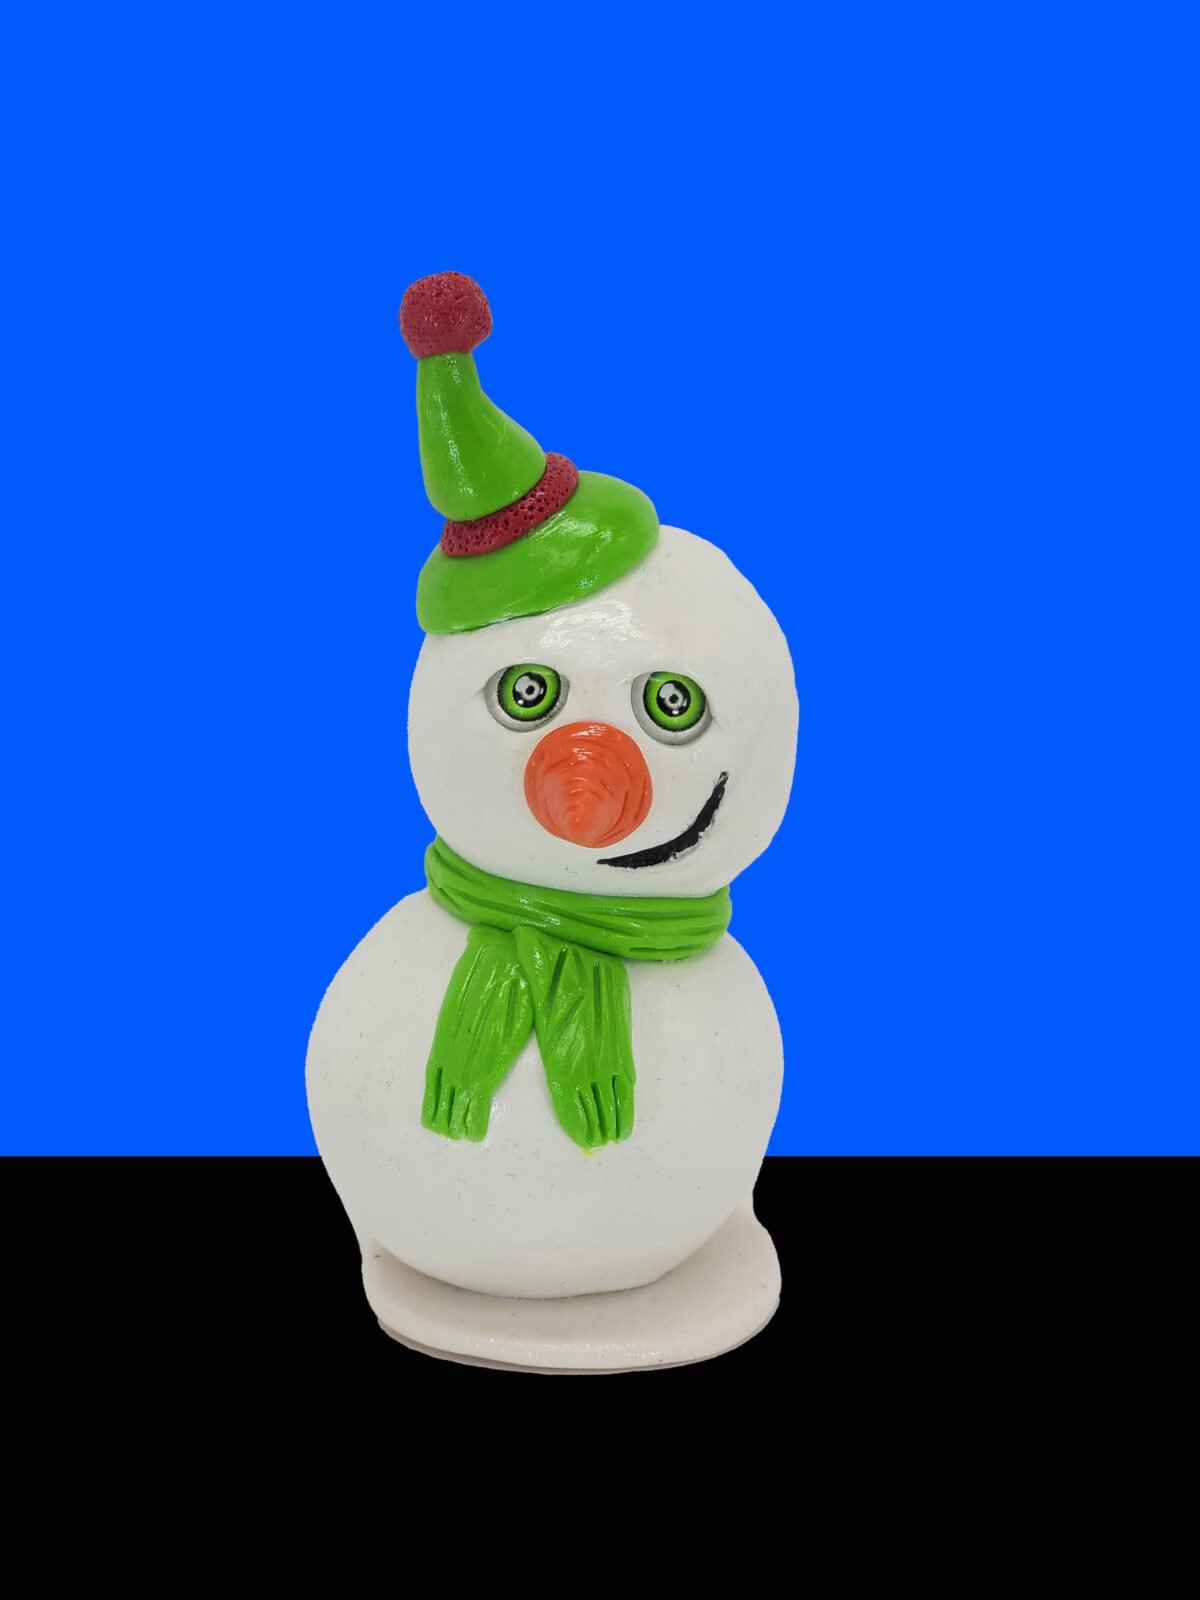 Smirky Snowman clay sculpture in front of blue and black background.